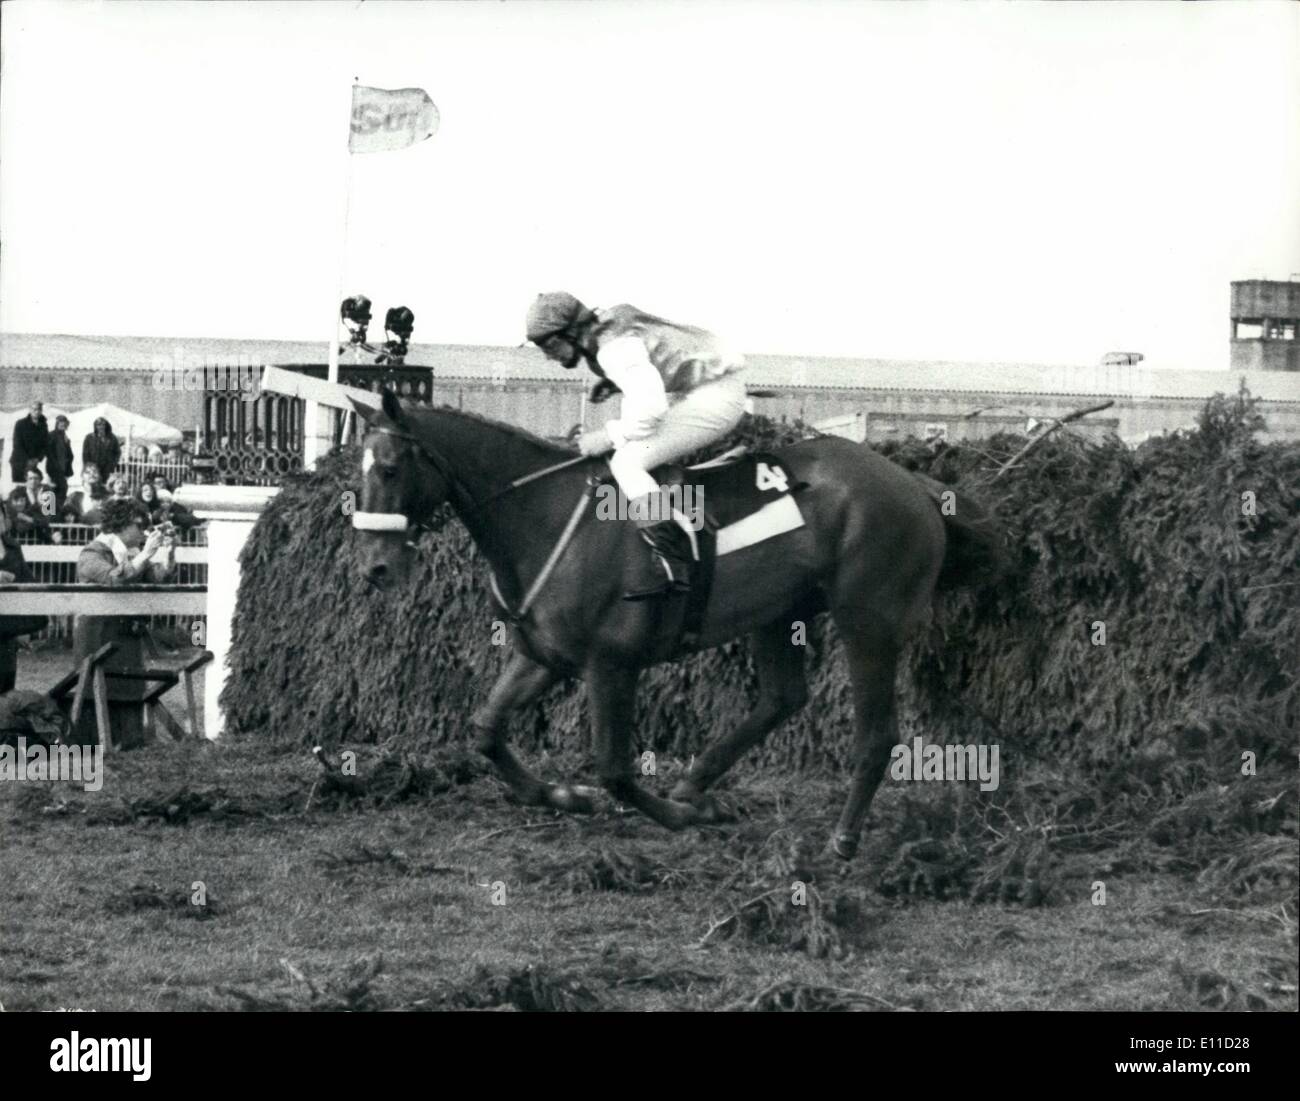 Apr. 04, 1977 - Charlotte Brew Just Fails To Complete The Aintree Caurse in The Grand National: 21 year old Charlotte Brew, the Stock Photo